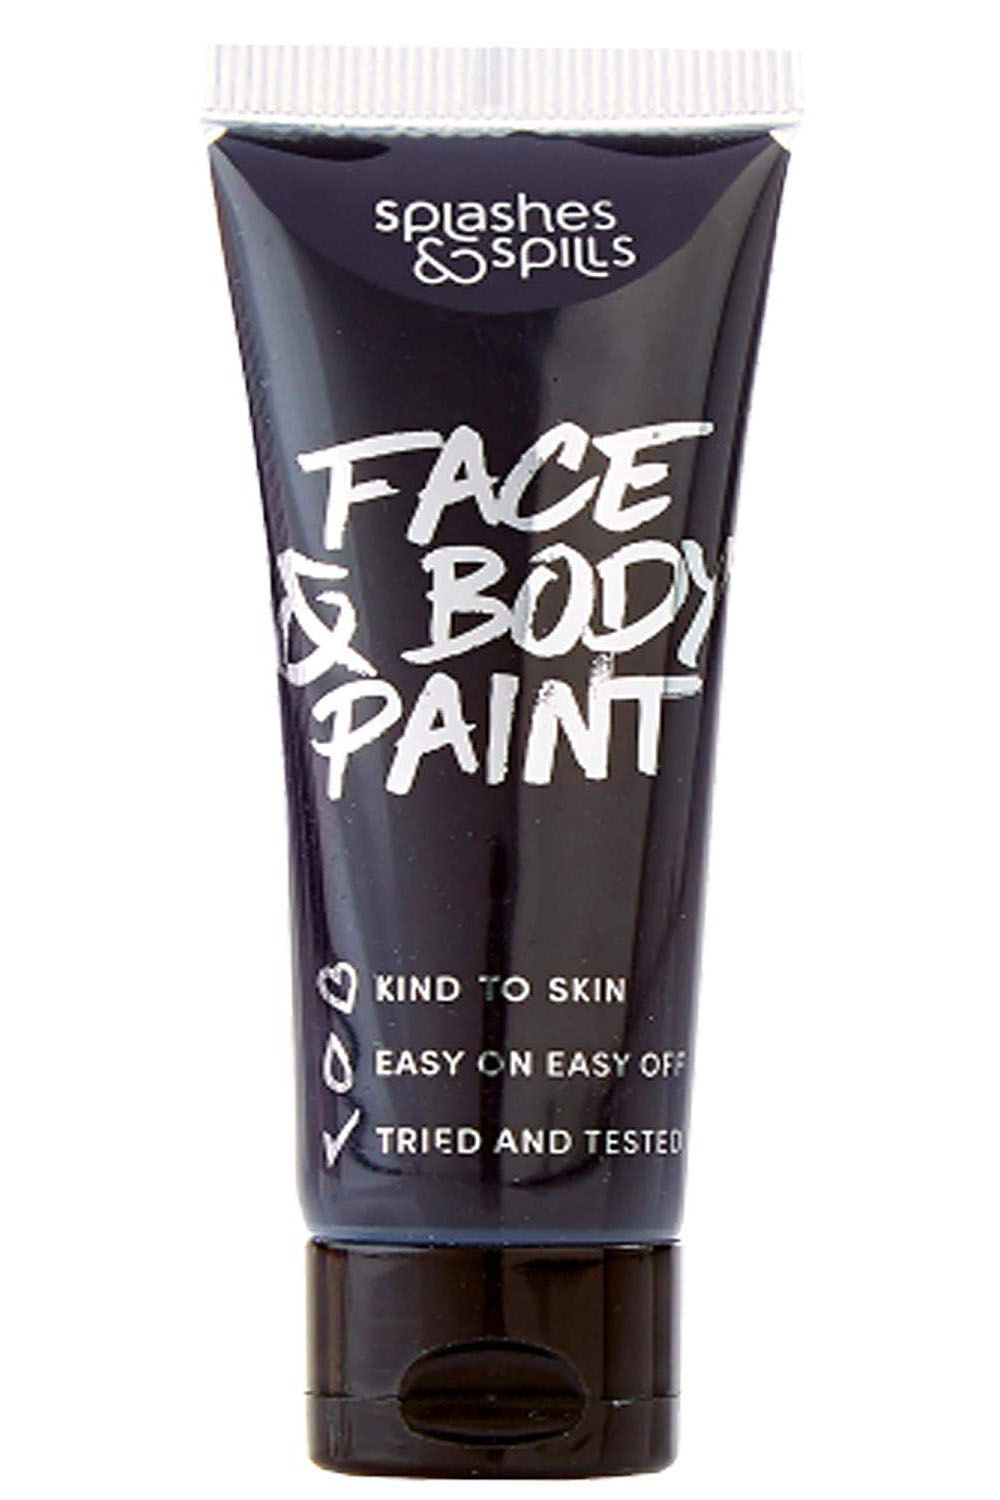 Splashes & Spills Face and Body Paint Cream